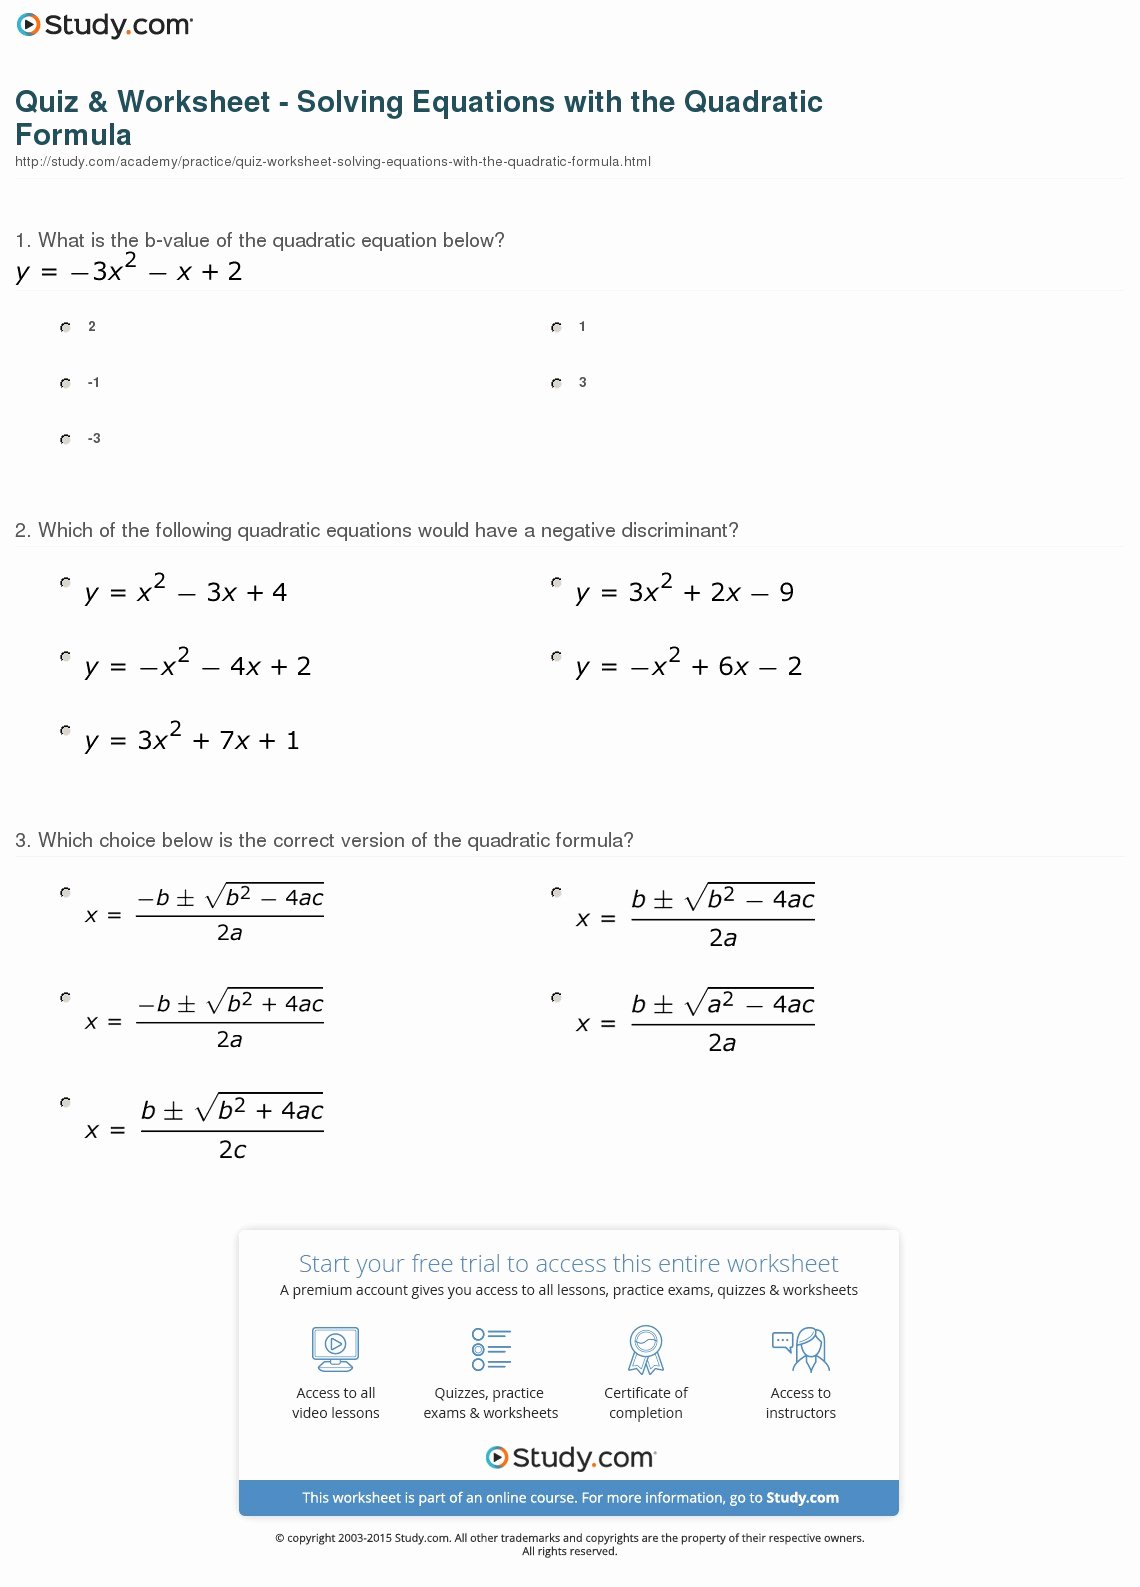 Quadratic Functions Worksheet with Answers Elegant Quiz &amp; Worksheet solving Equations with the Quadratic